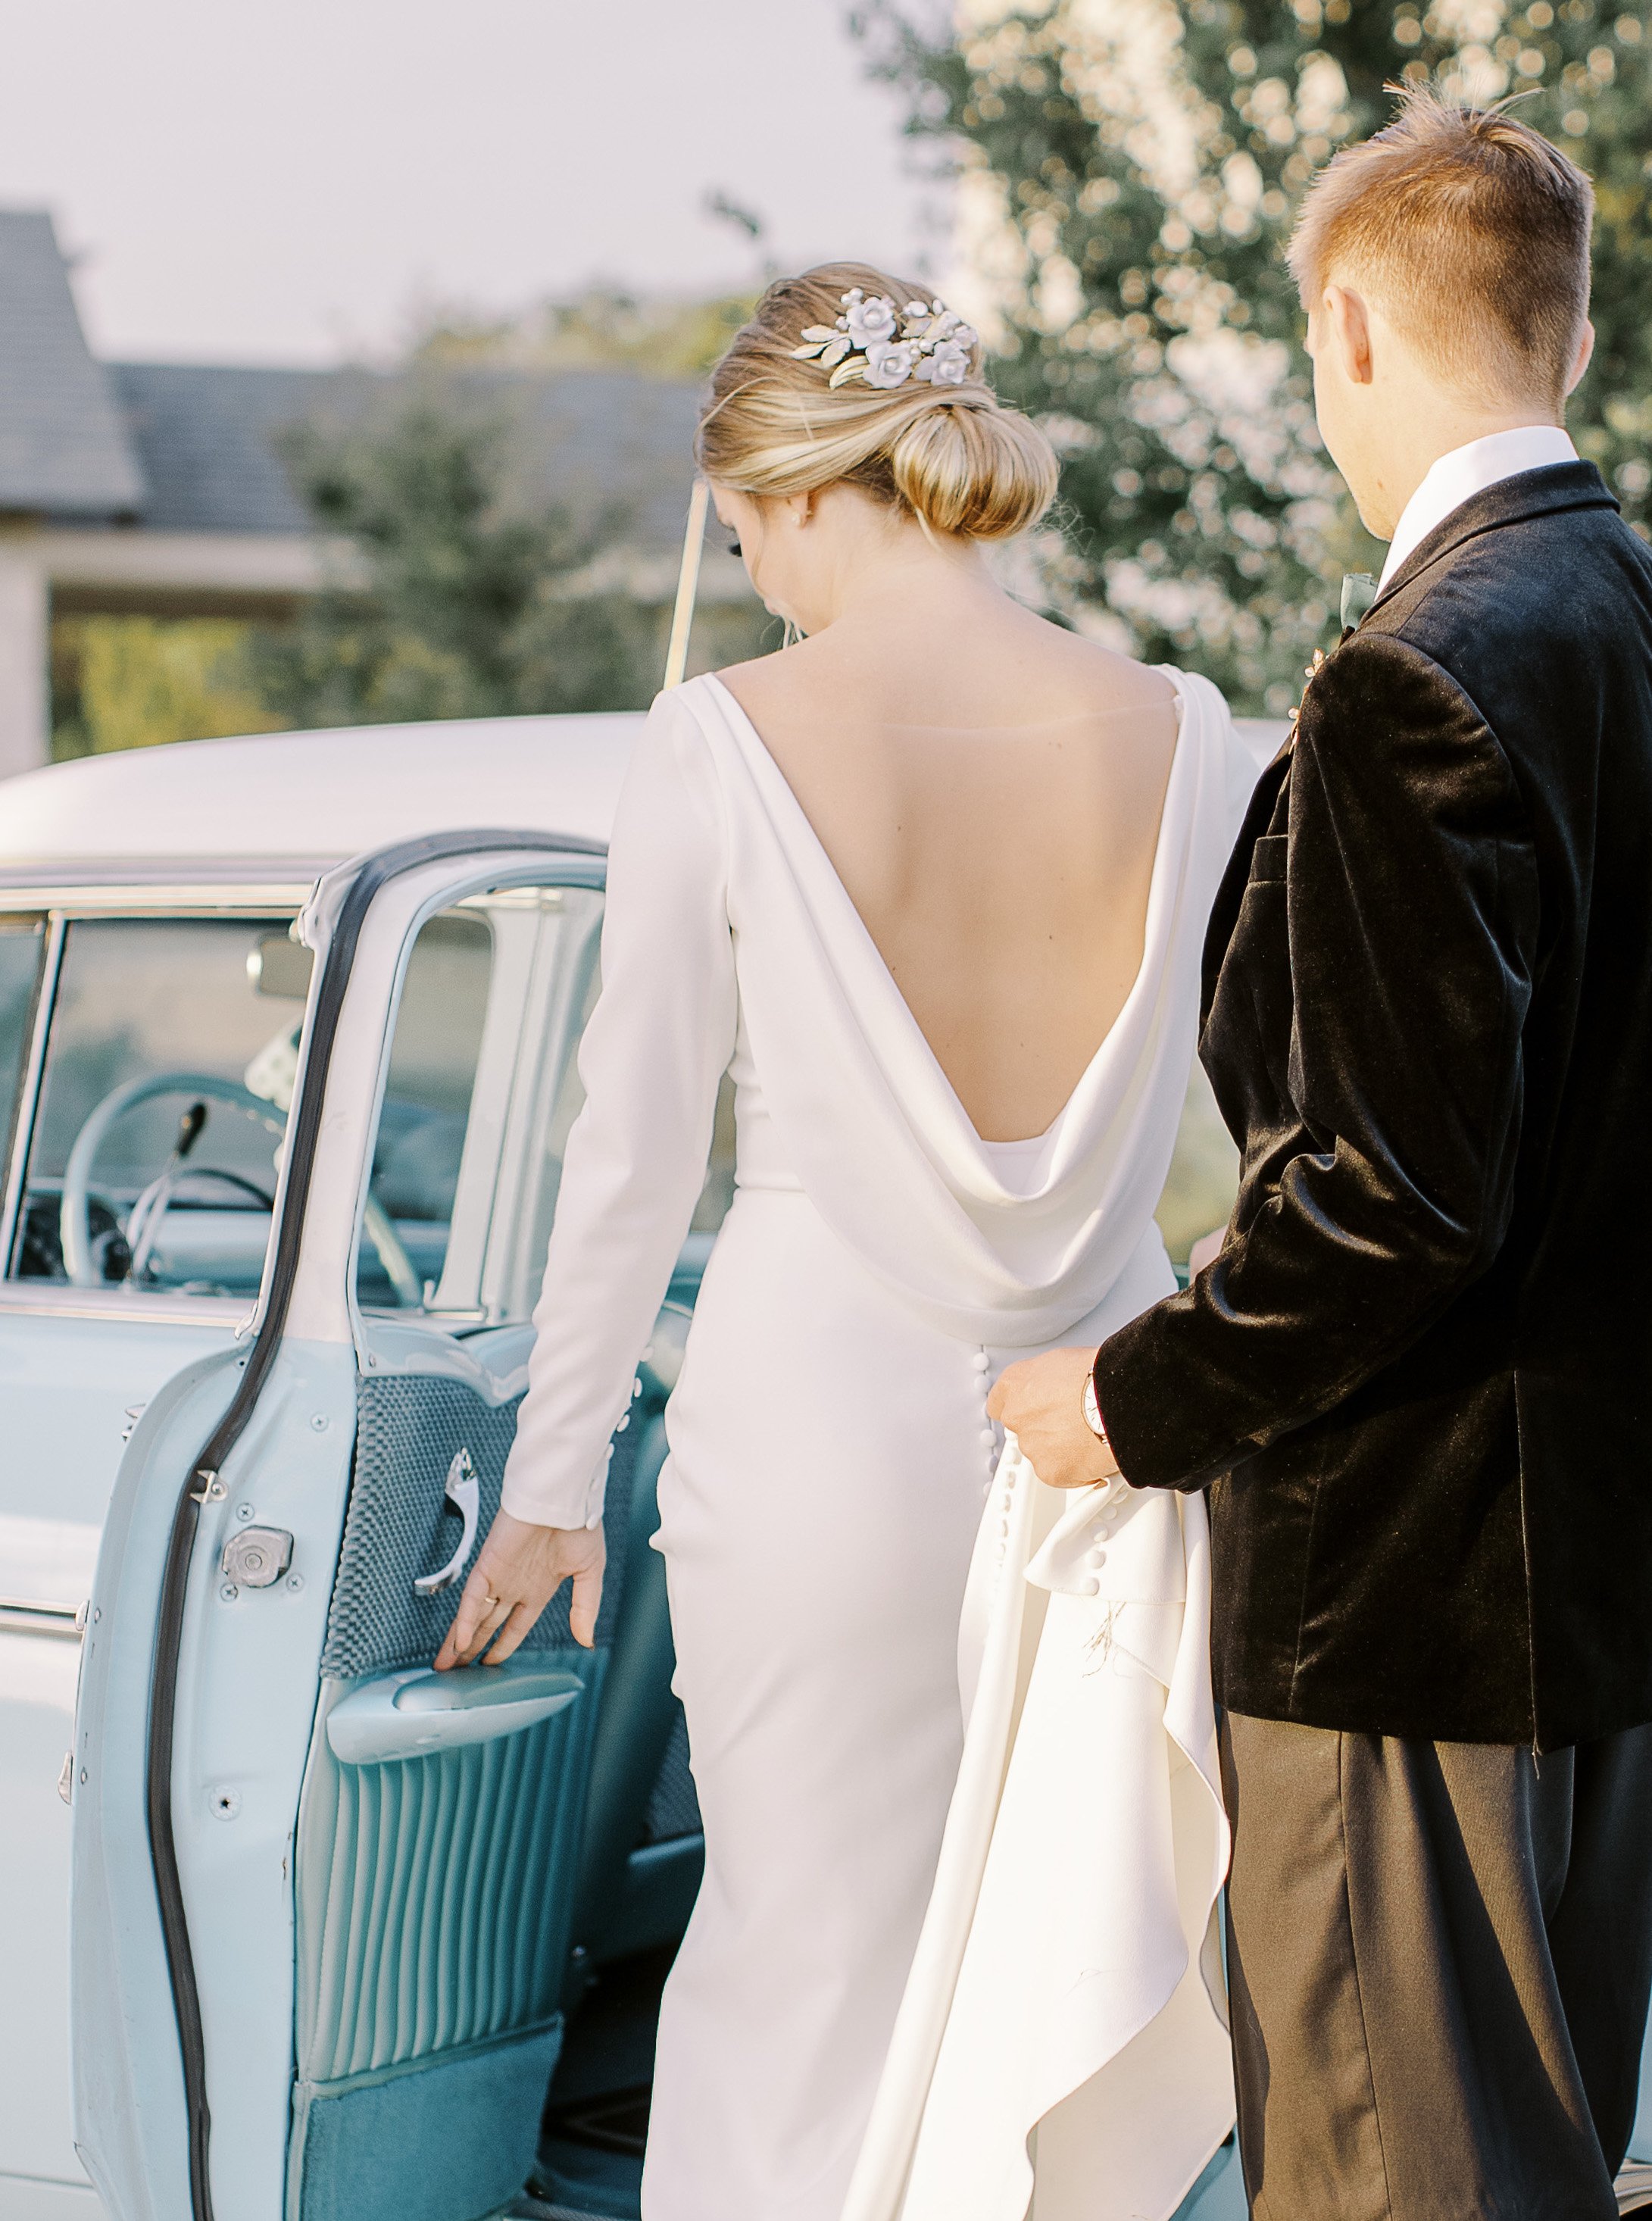 A groom picks up with train of a brides gown as she gets in the backseat of a vintage light blue car.